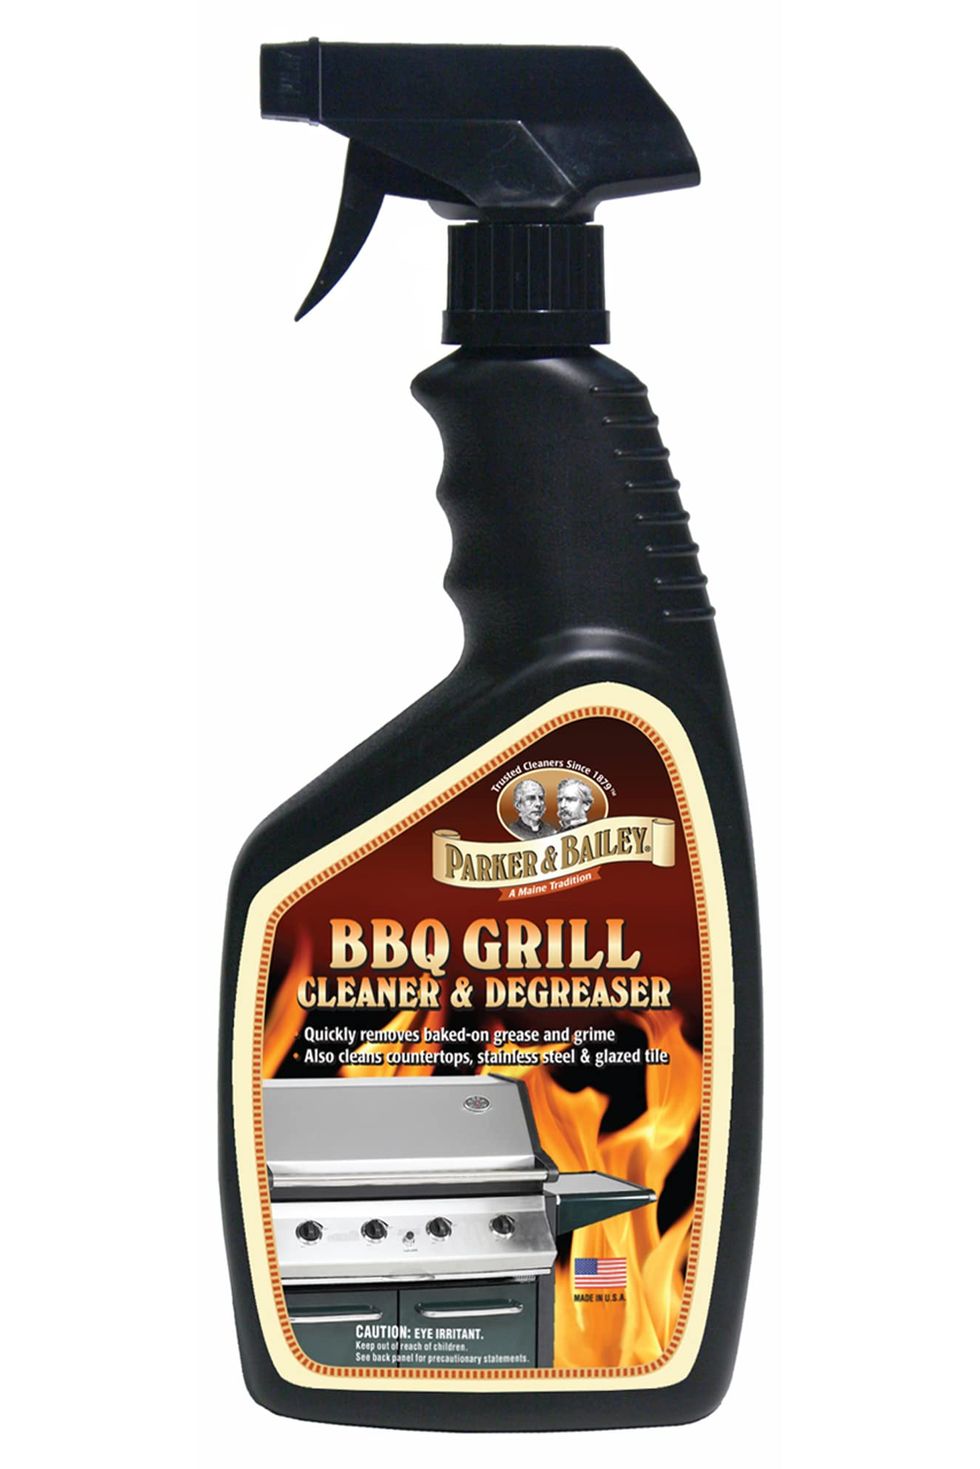 Weber Exterior Grill Cleaner, Care